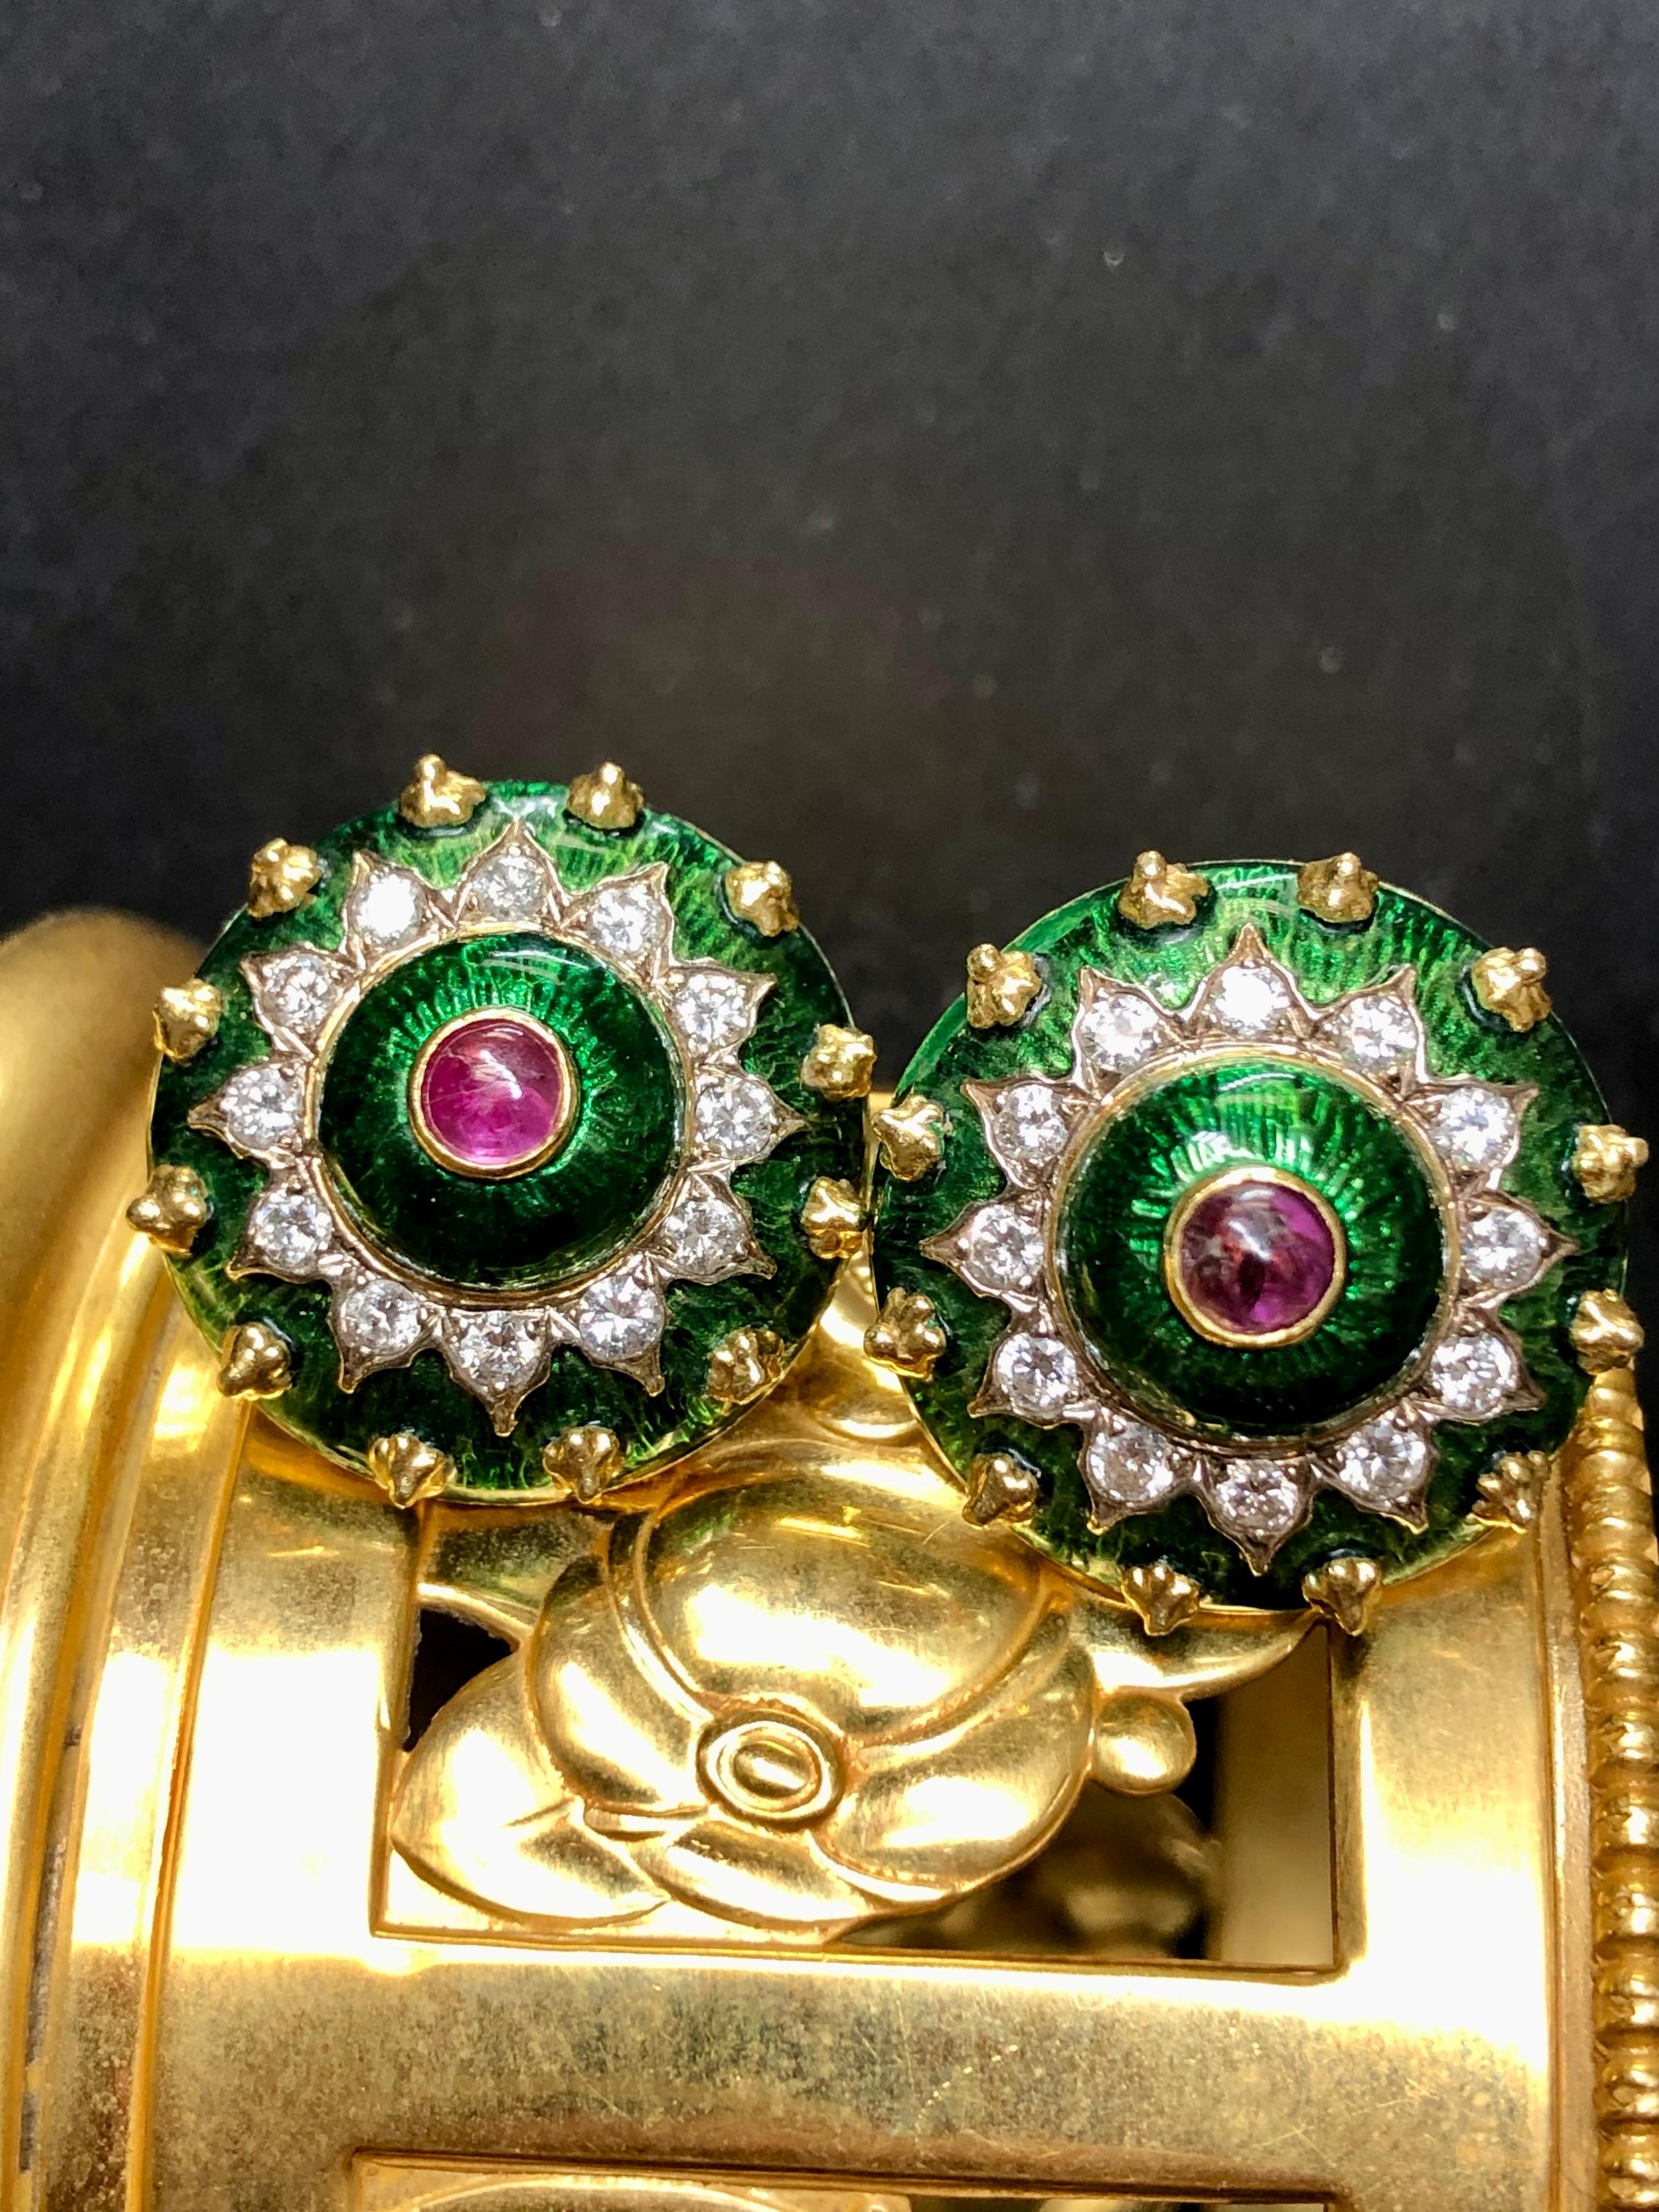 A striking pair of earrings by Boris Lebeau. Hand crafted in 18K yellow gold, these earrings are done in bright green enamel and set with approximately 1.20cttw in G/H Vs1-2 clarity round diamond as well as natural cabochon